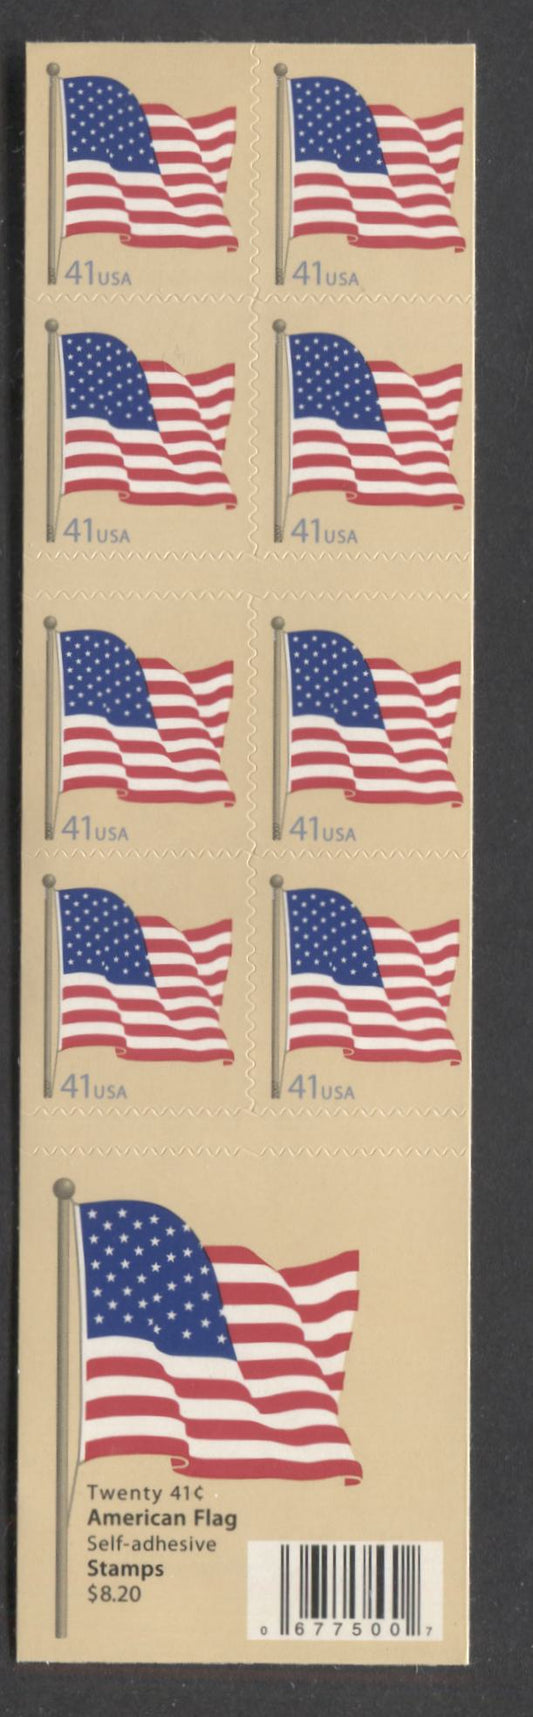 Lot 12 United States SC#4191a 41c Multicolored 2007 Flag Issue, Double Sided Booklet, A VFNH Booklet Of 20, Click on Listing to See ALL Pictures, 2017 Scott Cat. $17